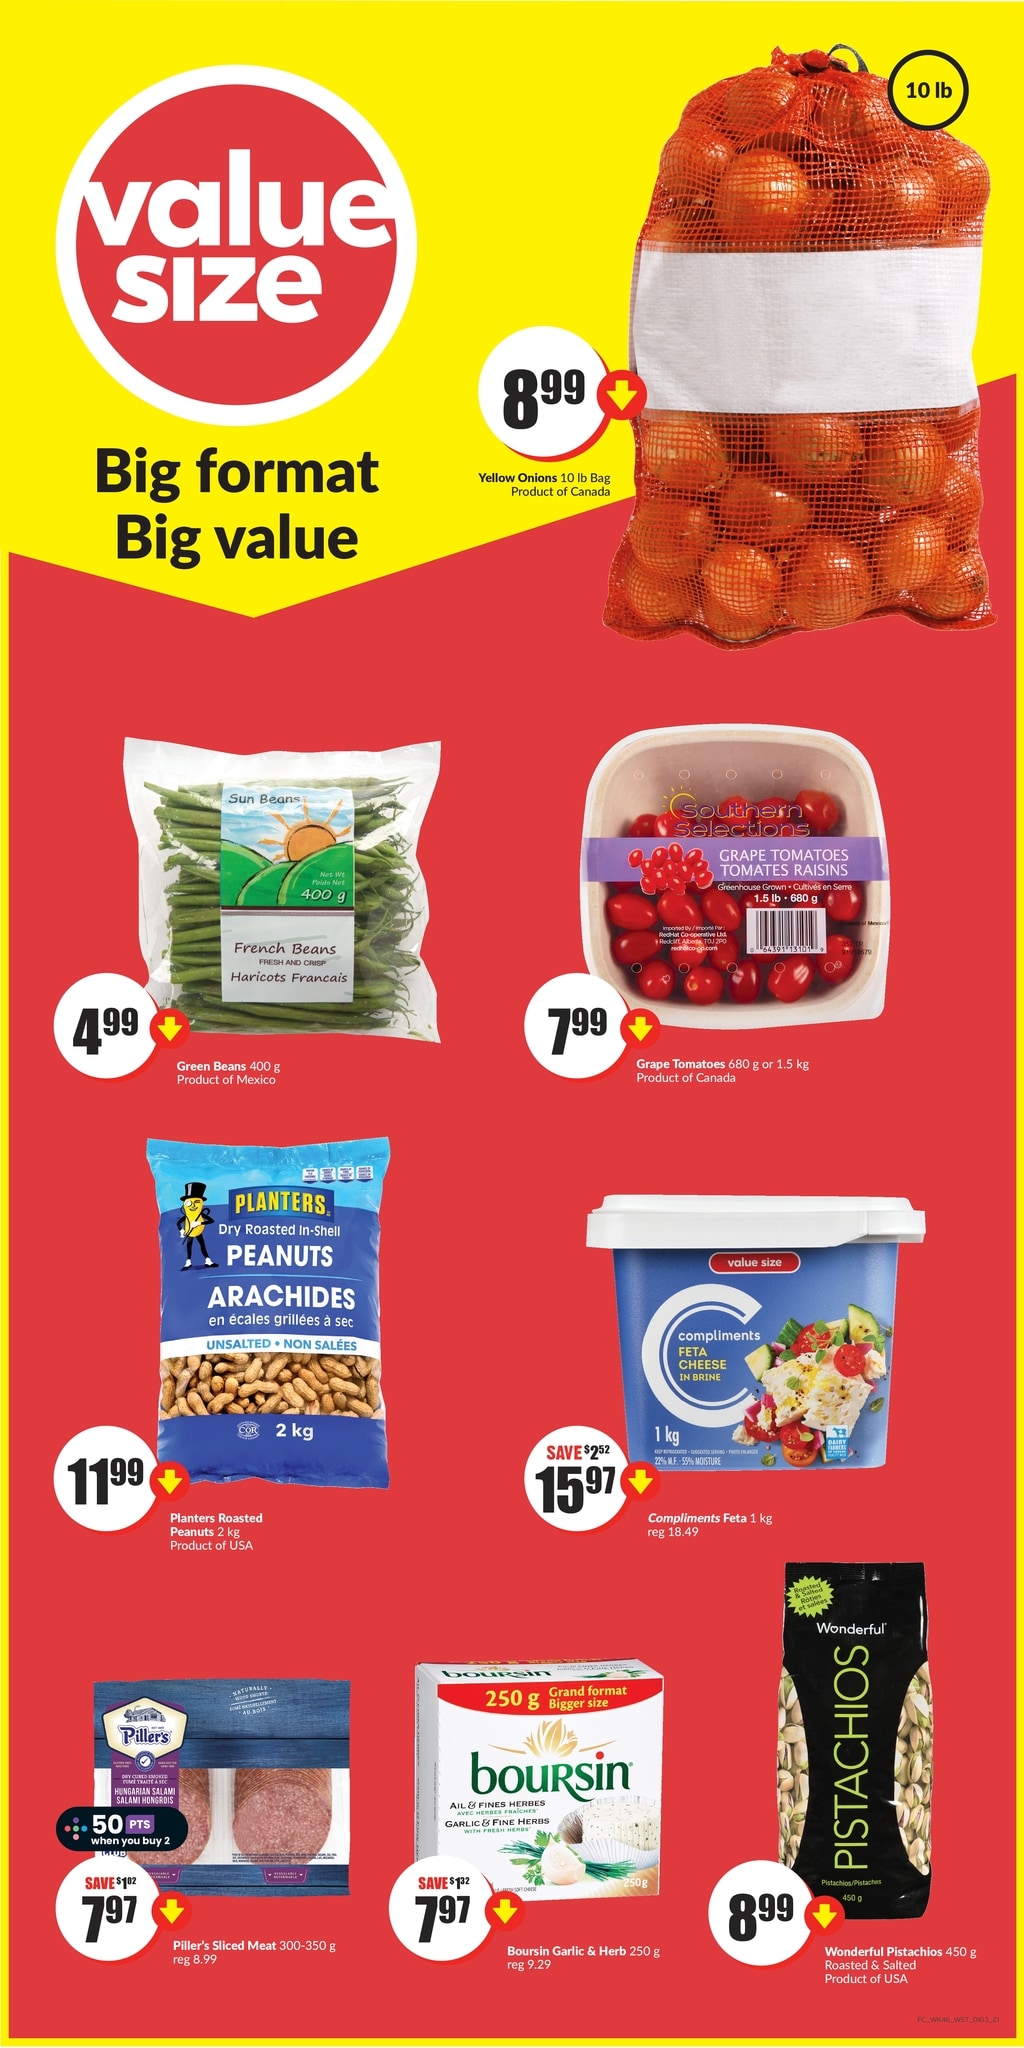 FreshCo - British Columbia - Weekly Flyer Specials - Page 9